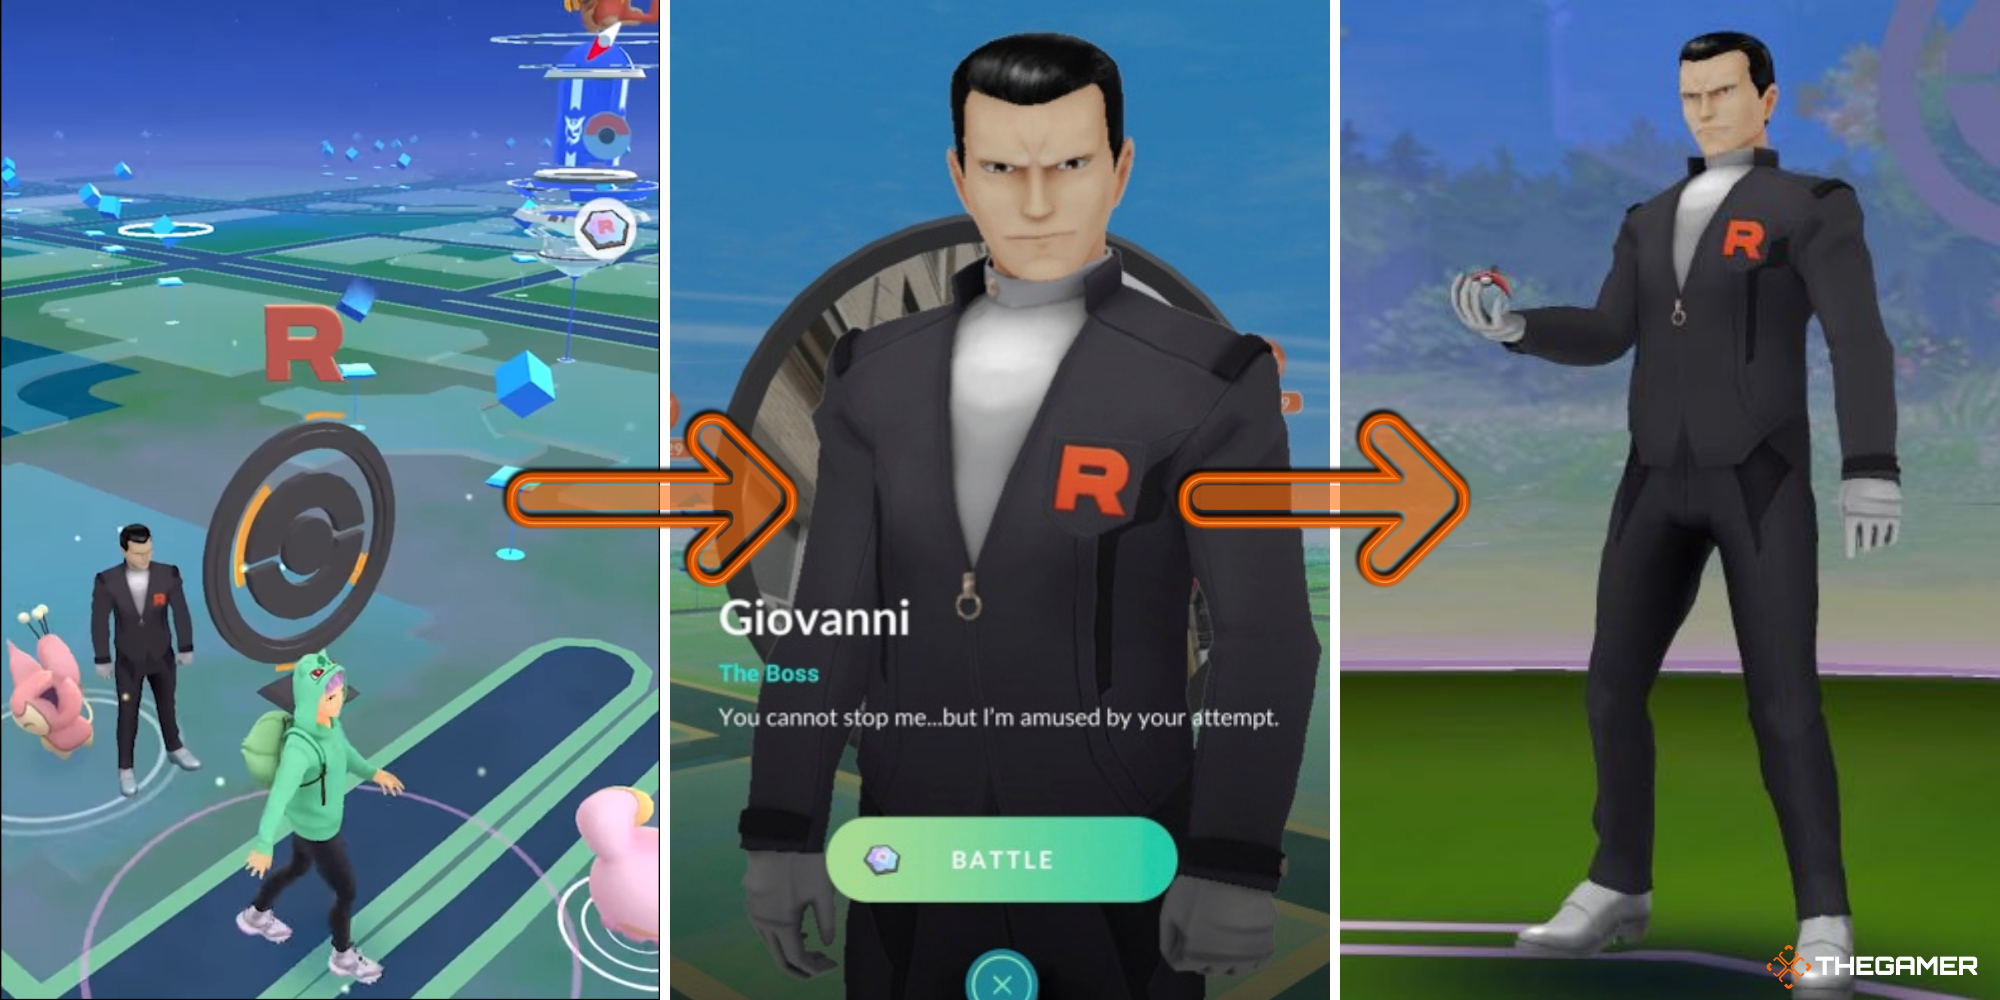 Pokemon GO Shadow Pokestop on left, talking to Giovanni in centre, fighting Giovanni on right